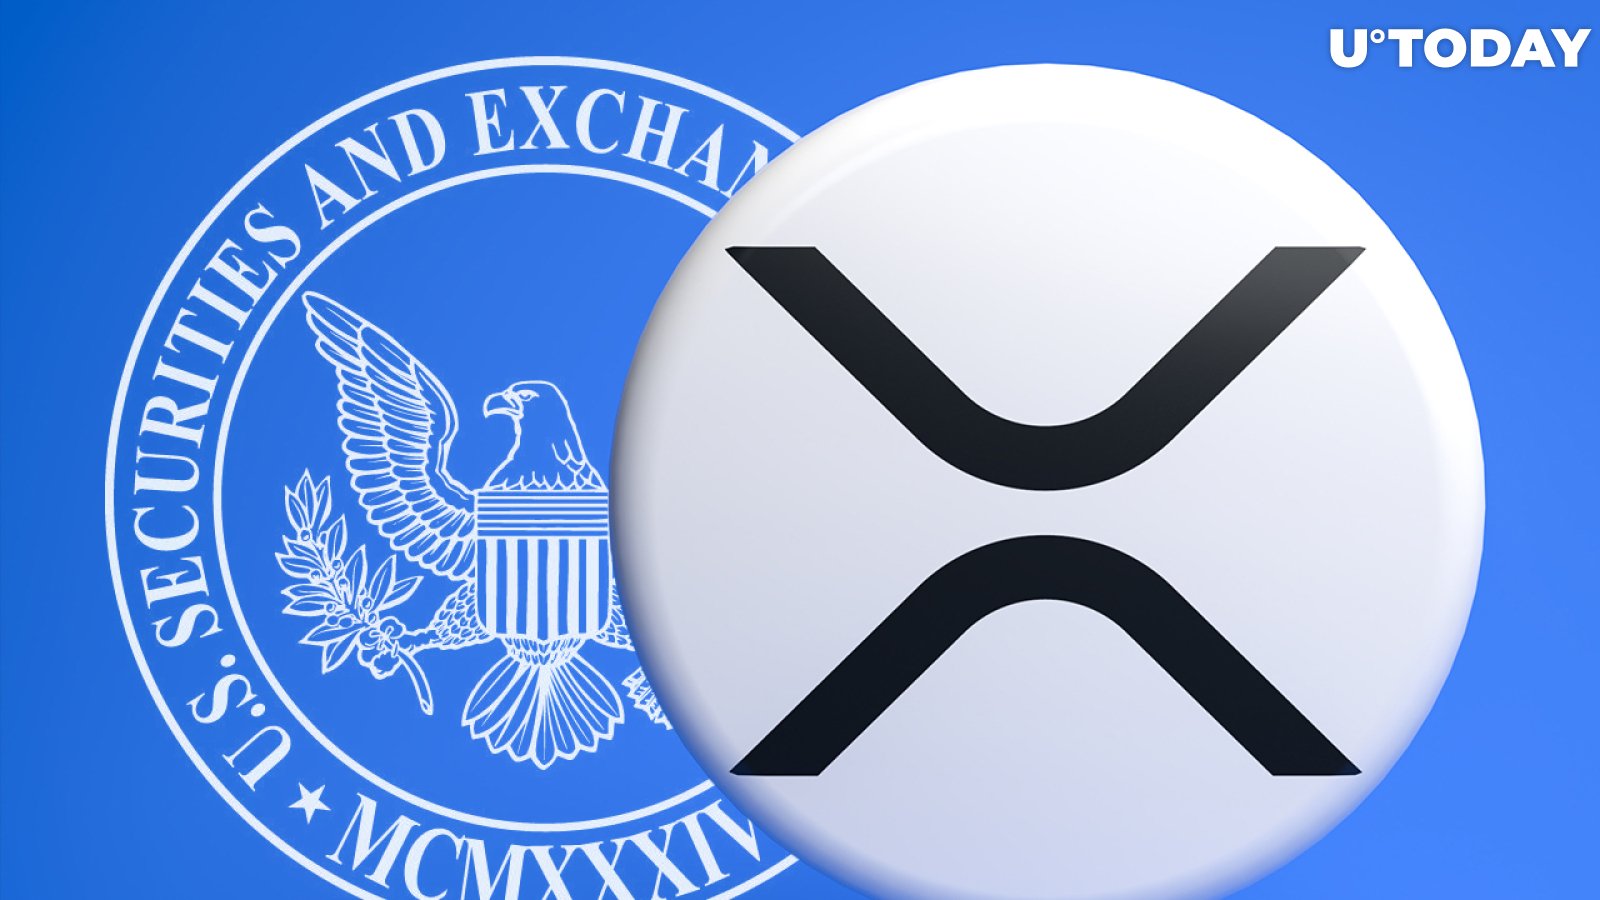 Ripple v. SEC: Agency Gets More Time to Oppose Amicus Request Permission by XRP Holders